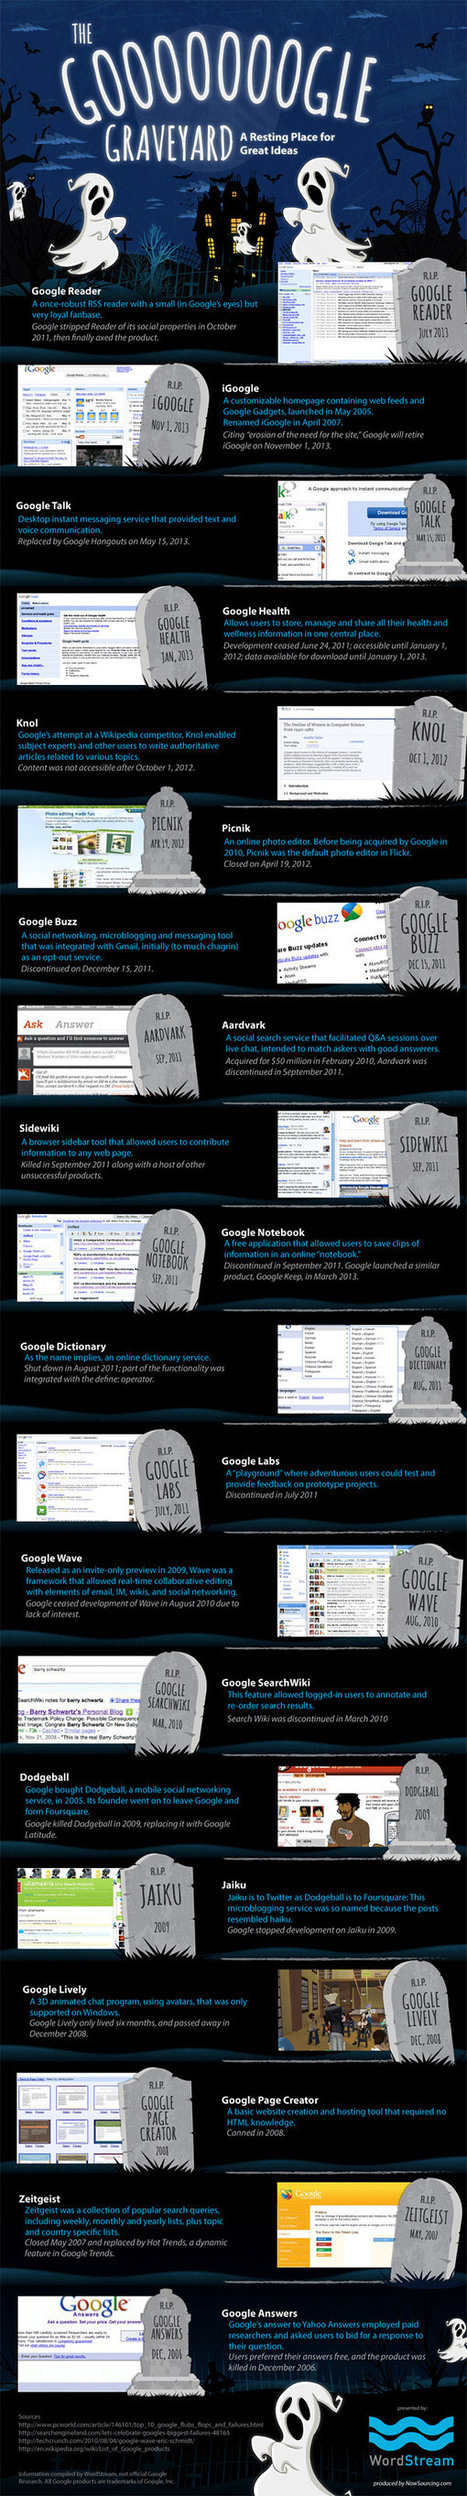 Google Graveyard [Infographic] | Social Media and its influence | Scoop.it